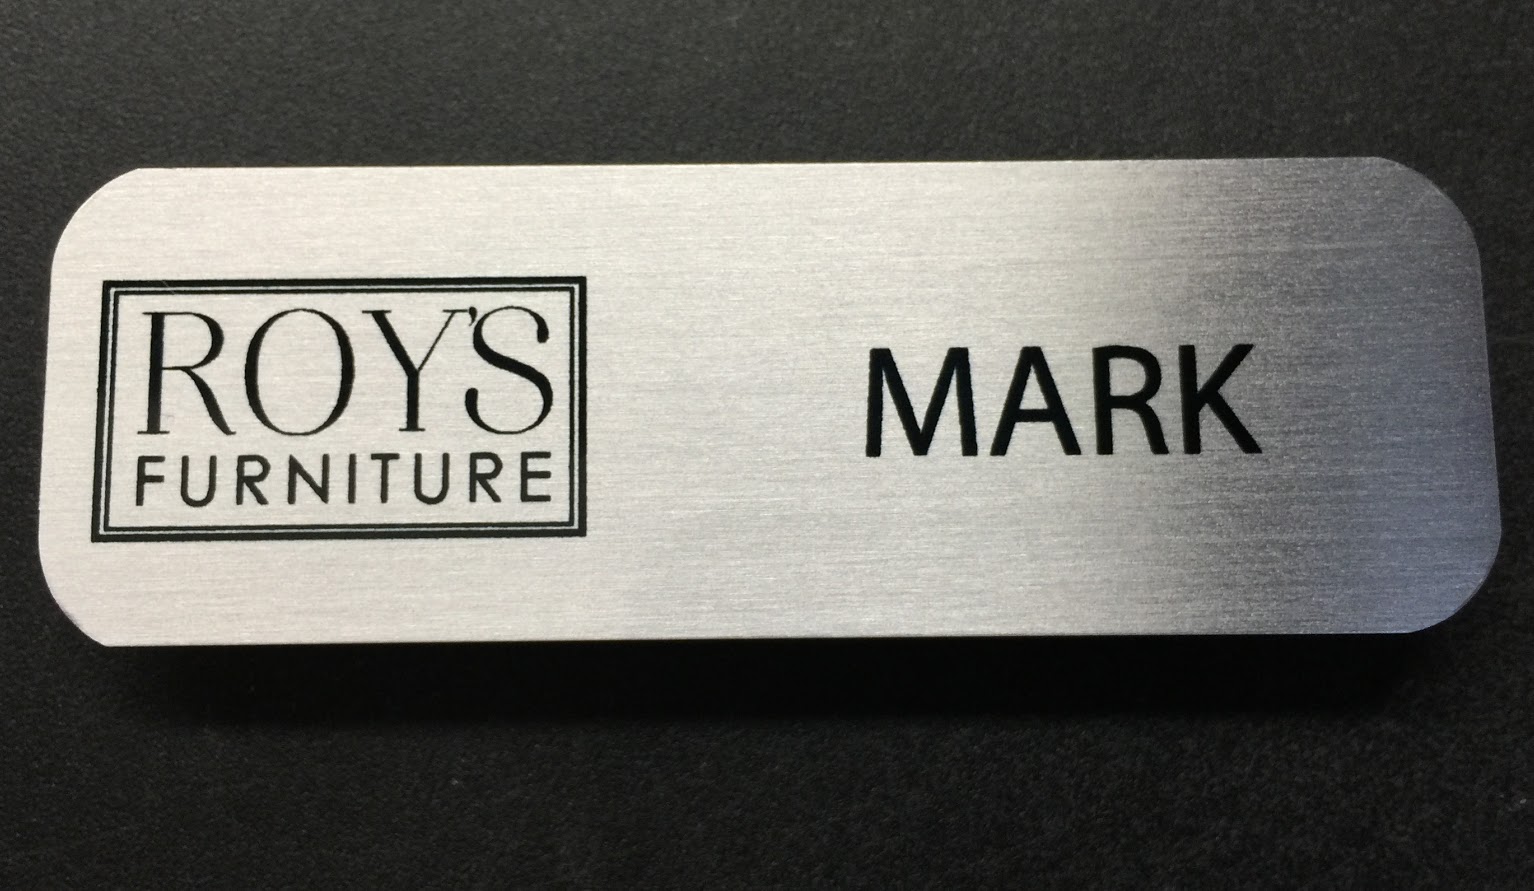 Brushed silver nametag. Design is for Roy's Furniture.